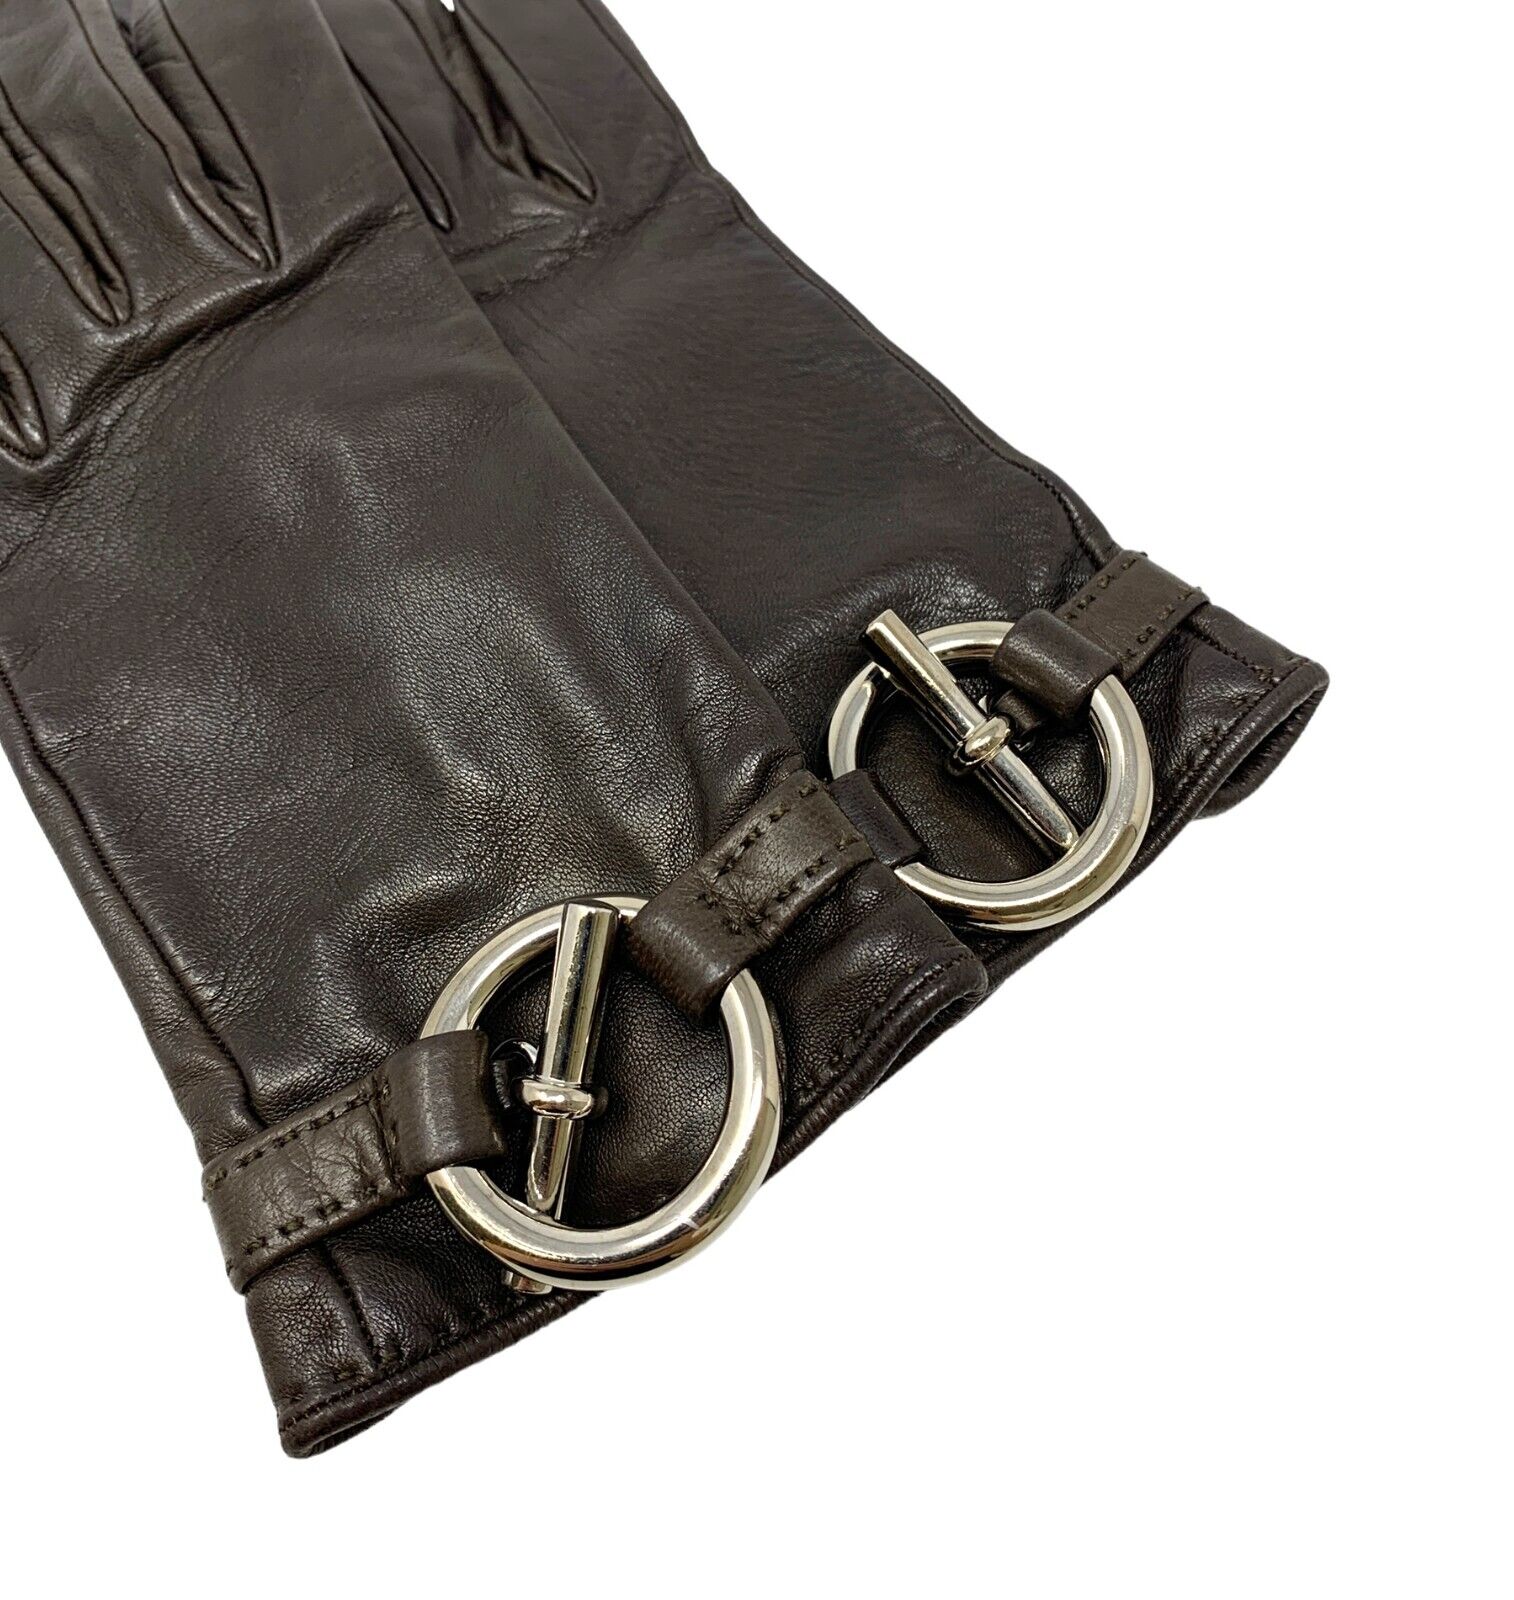 HERMES Vintage Leather Glove #6.5 Fashion Winter Accessory Brown Silver Rank AB